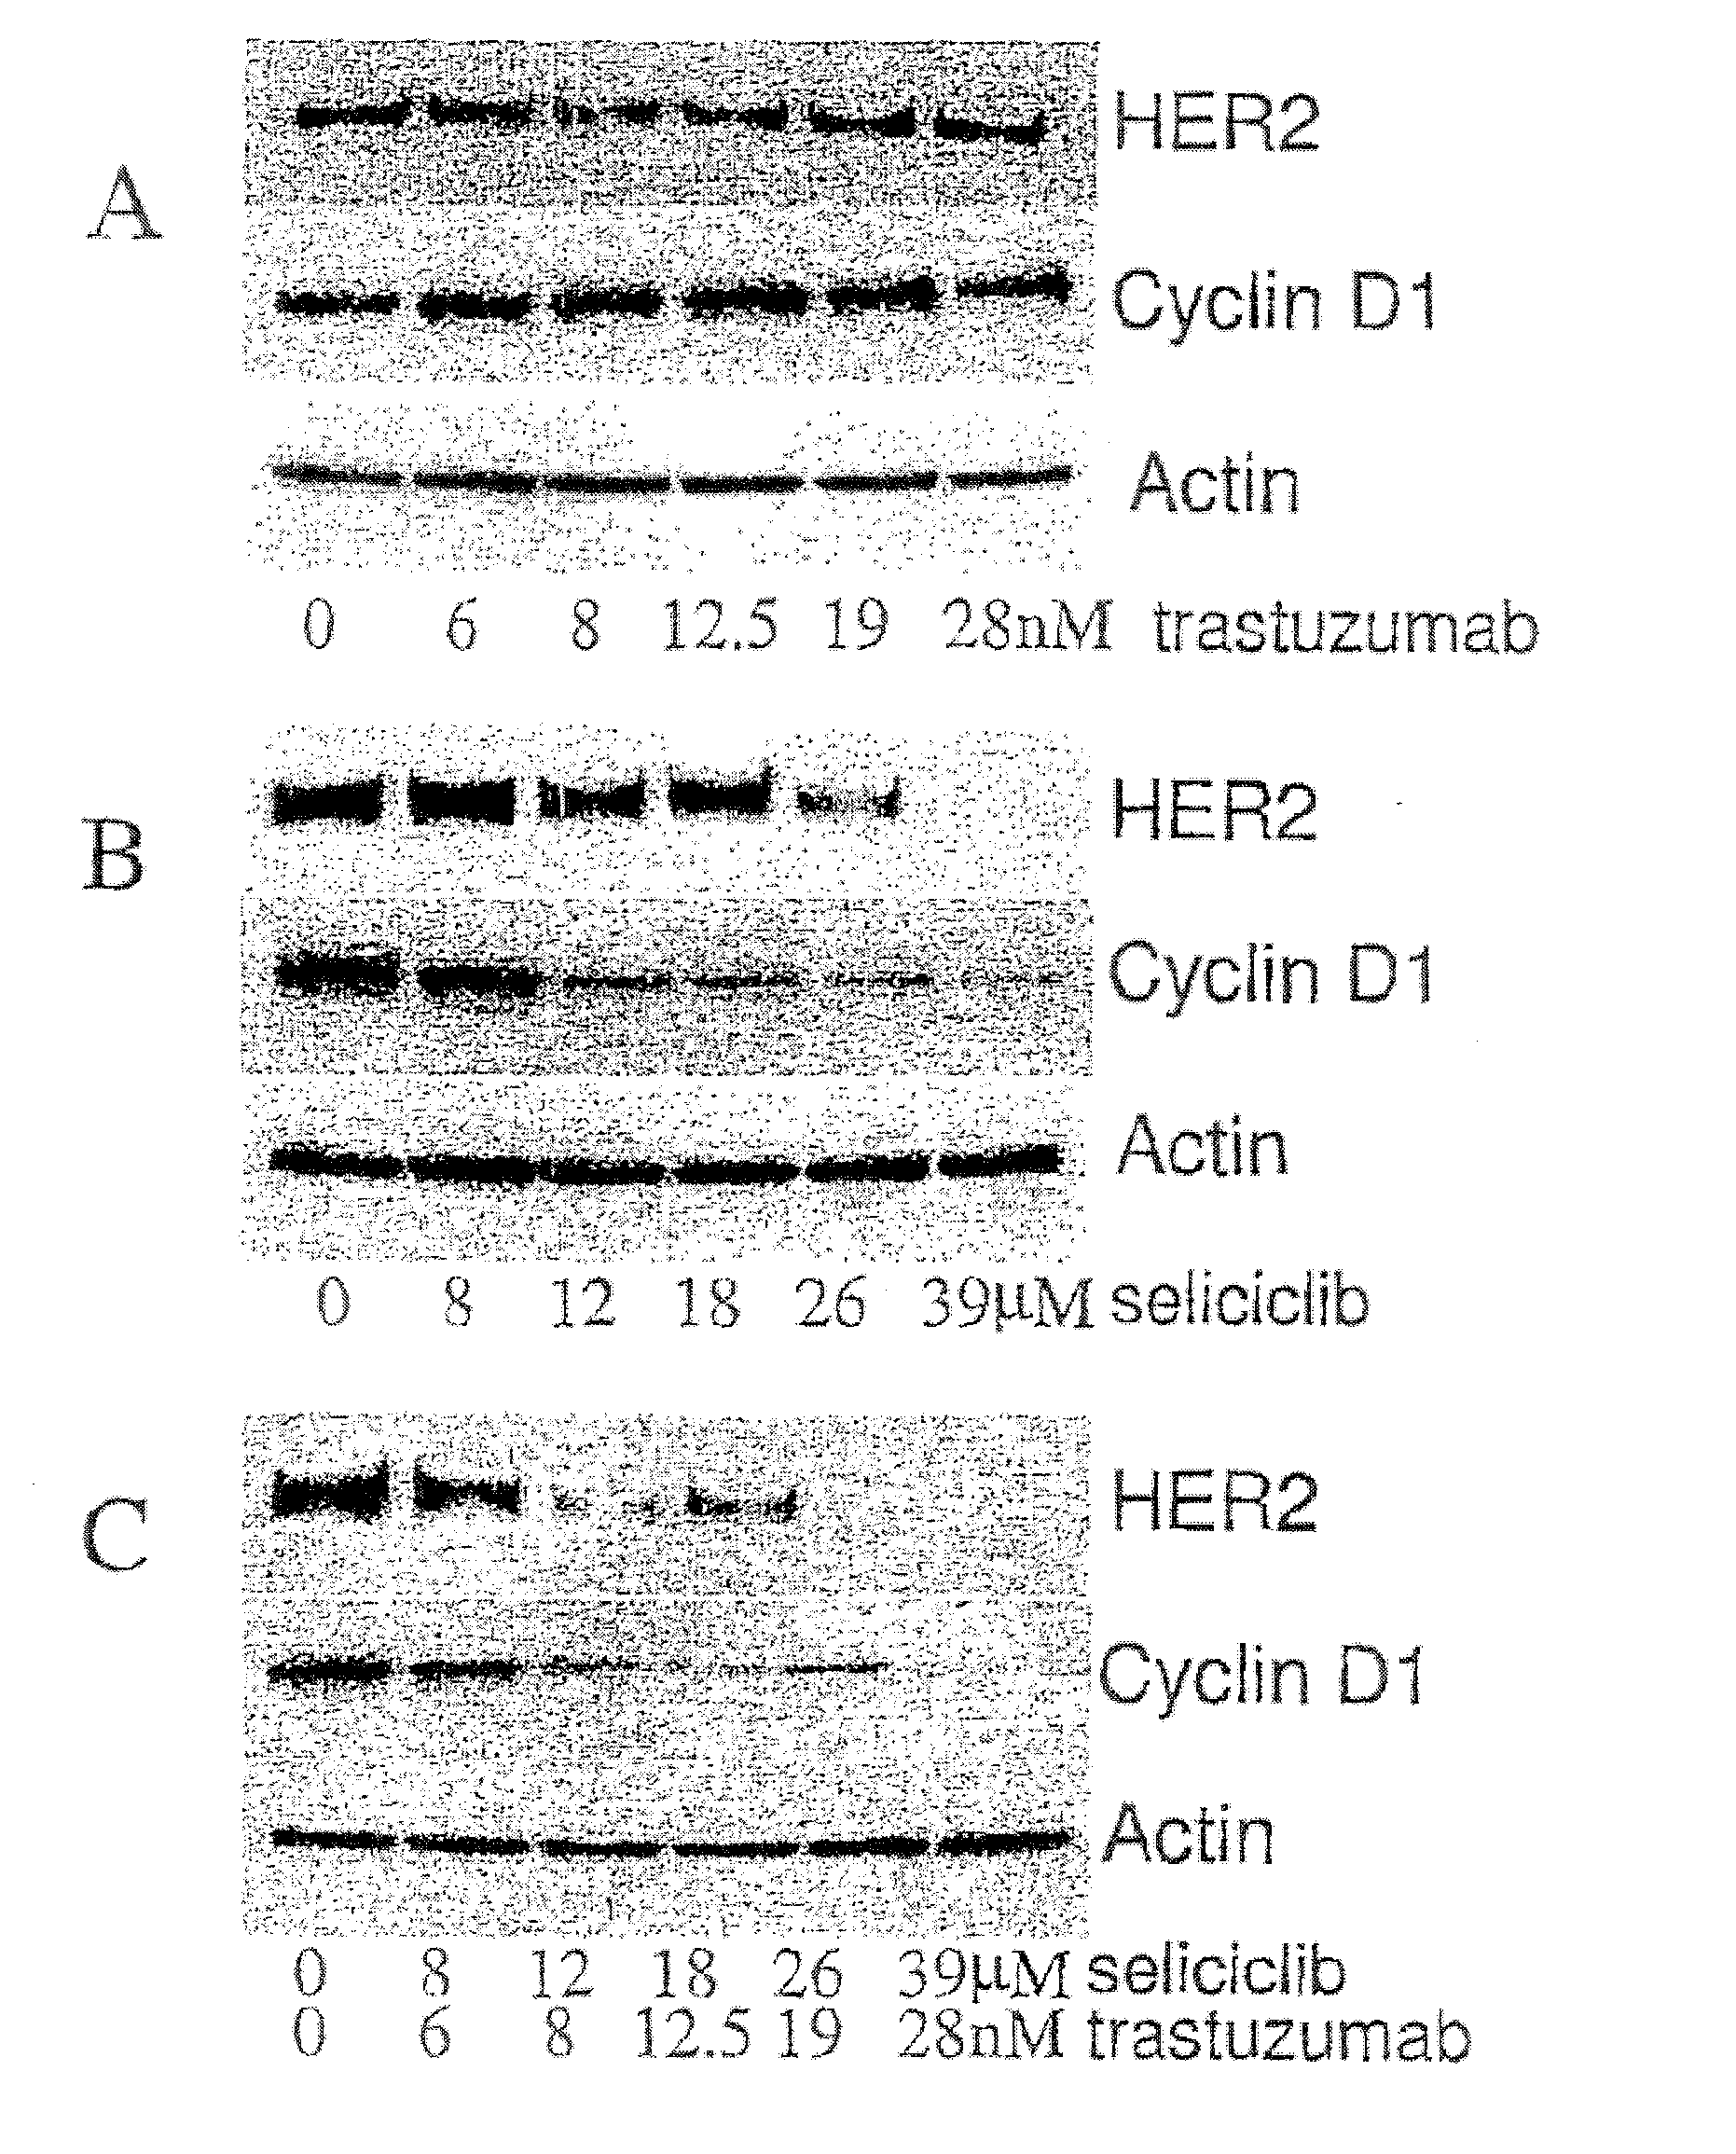 Combination of a purine-based cdk inhibitor with a tyrosine kinase inhibitor and use thereof in the treatment of proliferative disorders